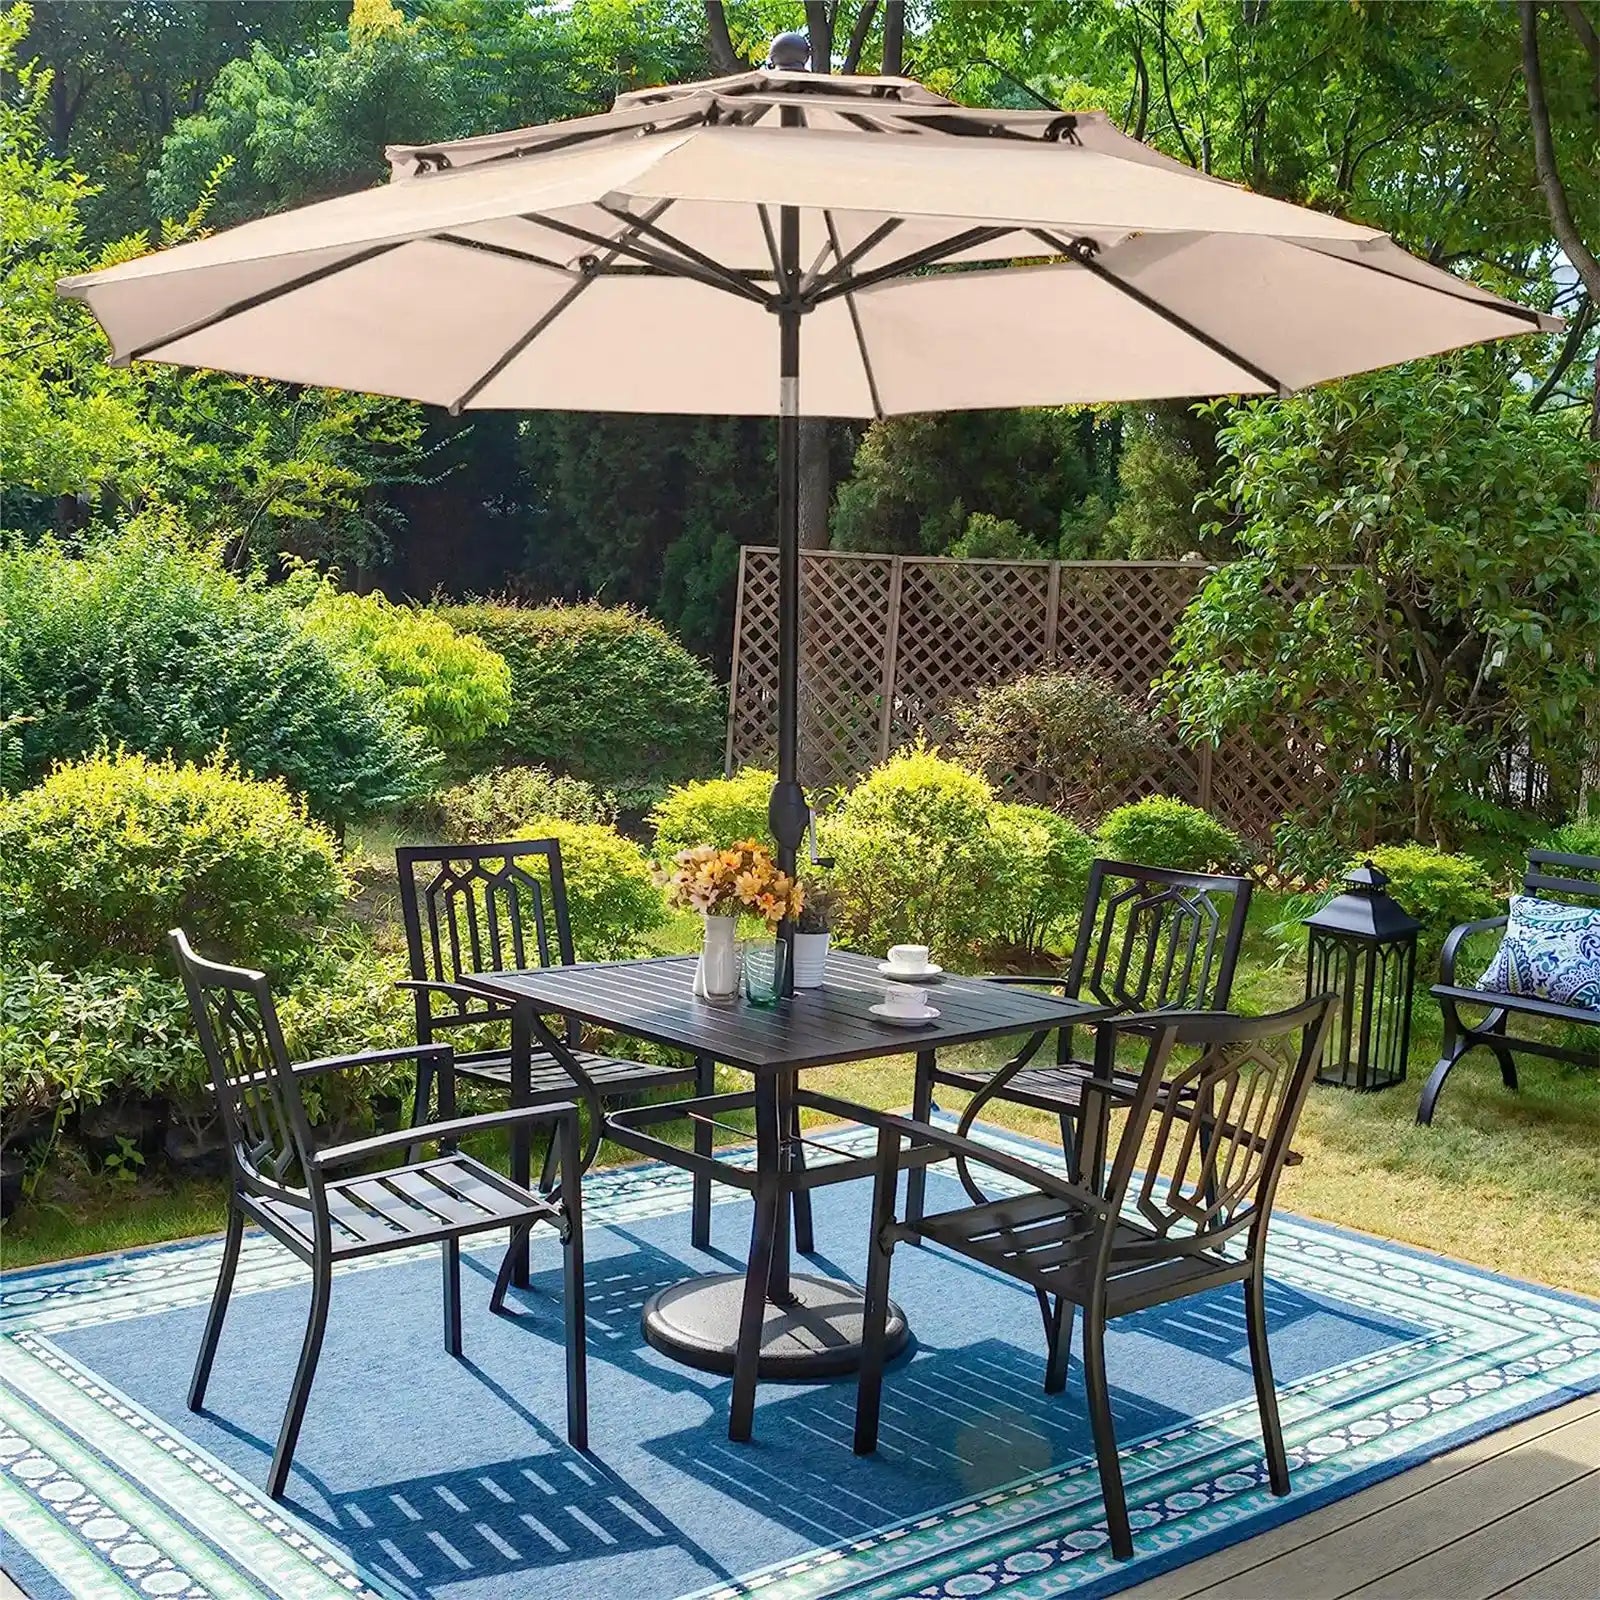 Patio Dining Set 6 pcs with Umbrella,1 Square Metal Table, 4 Metal Outdoor Stackable Chairs and 10ft 3 Tier Auto-tilt Umbrella